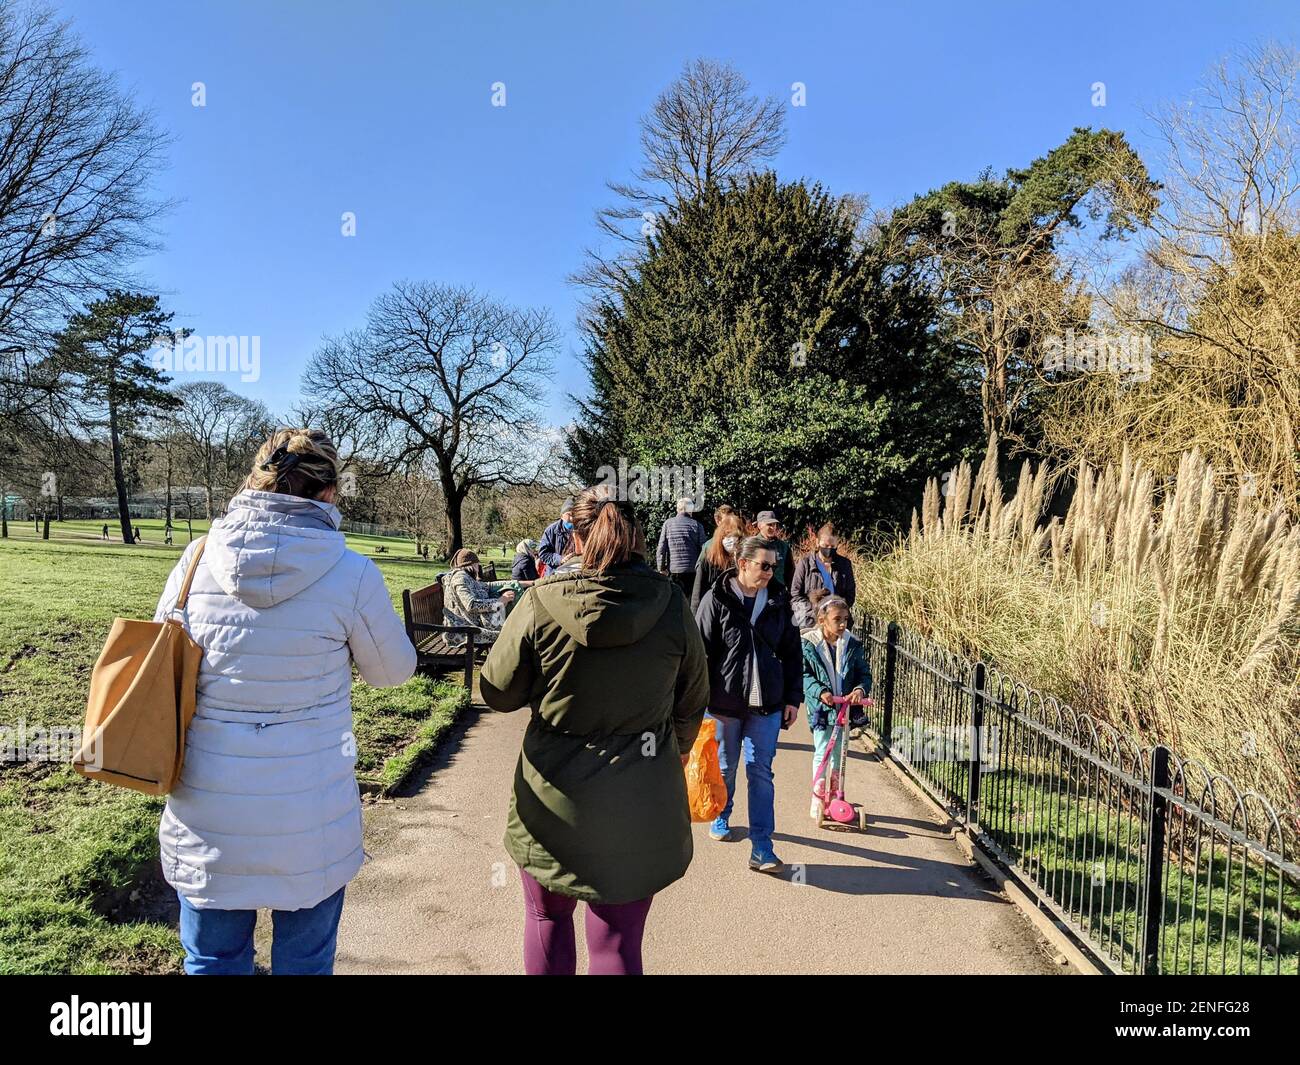 A crowded Golders Hill Park full of families and friends on a bright sunny day in February 2021 during England's covid19 lockdown. Golders Hill Park is part of Hampstead Heath. Stock Photo